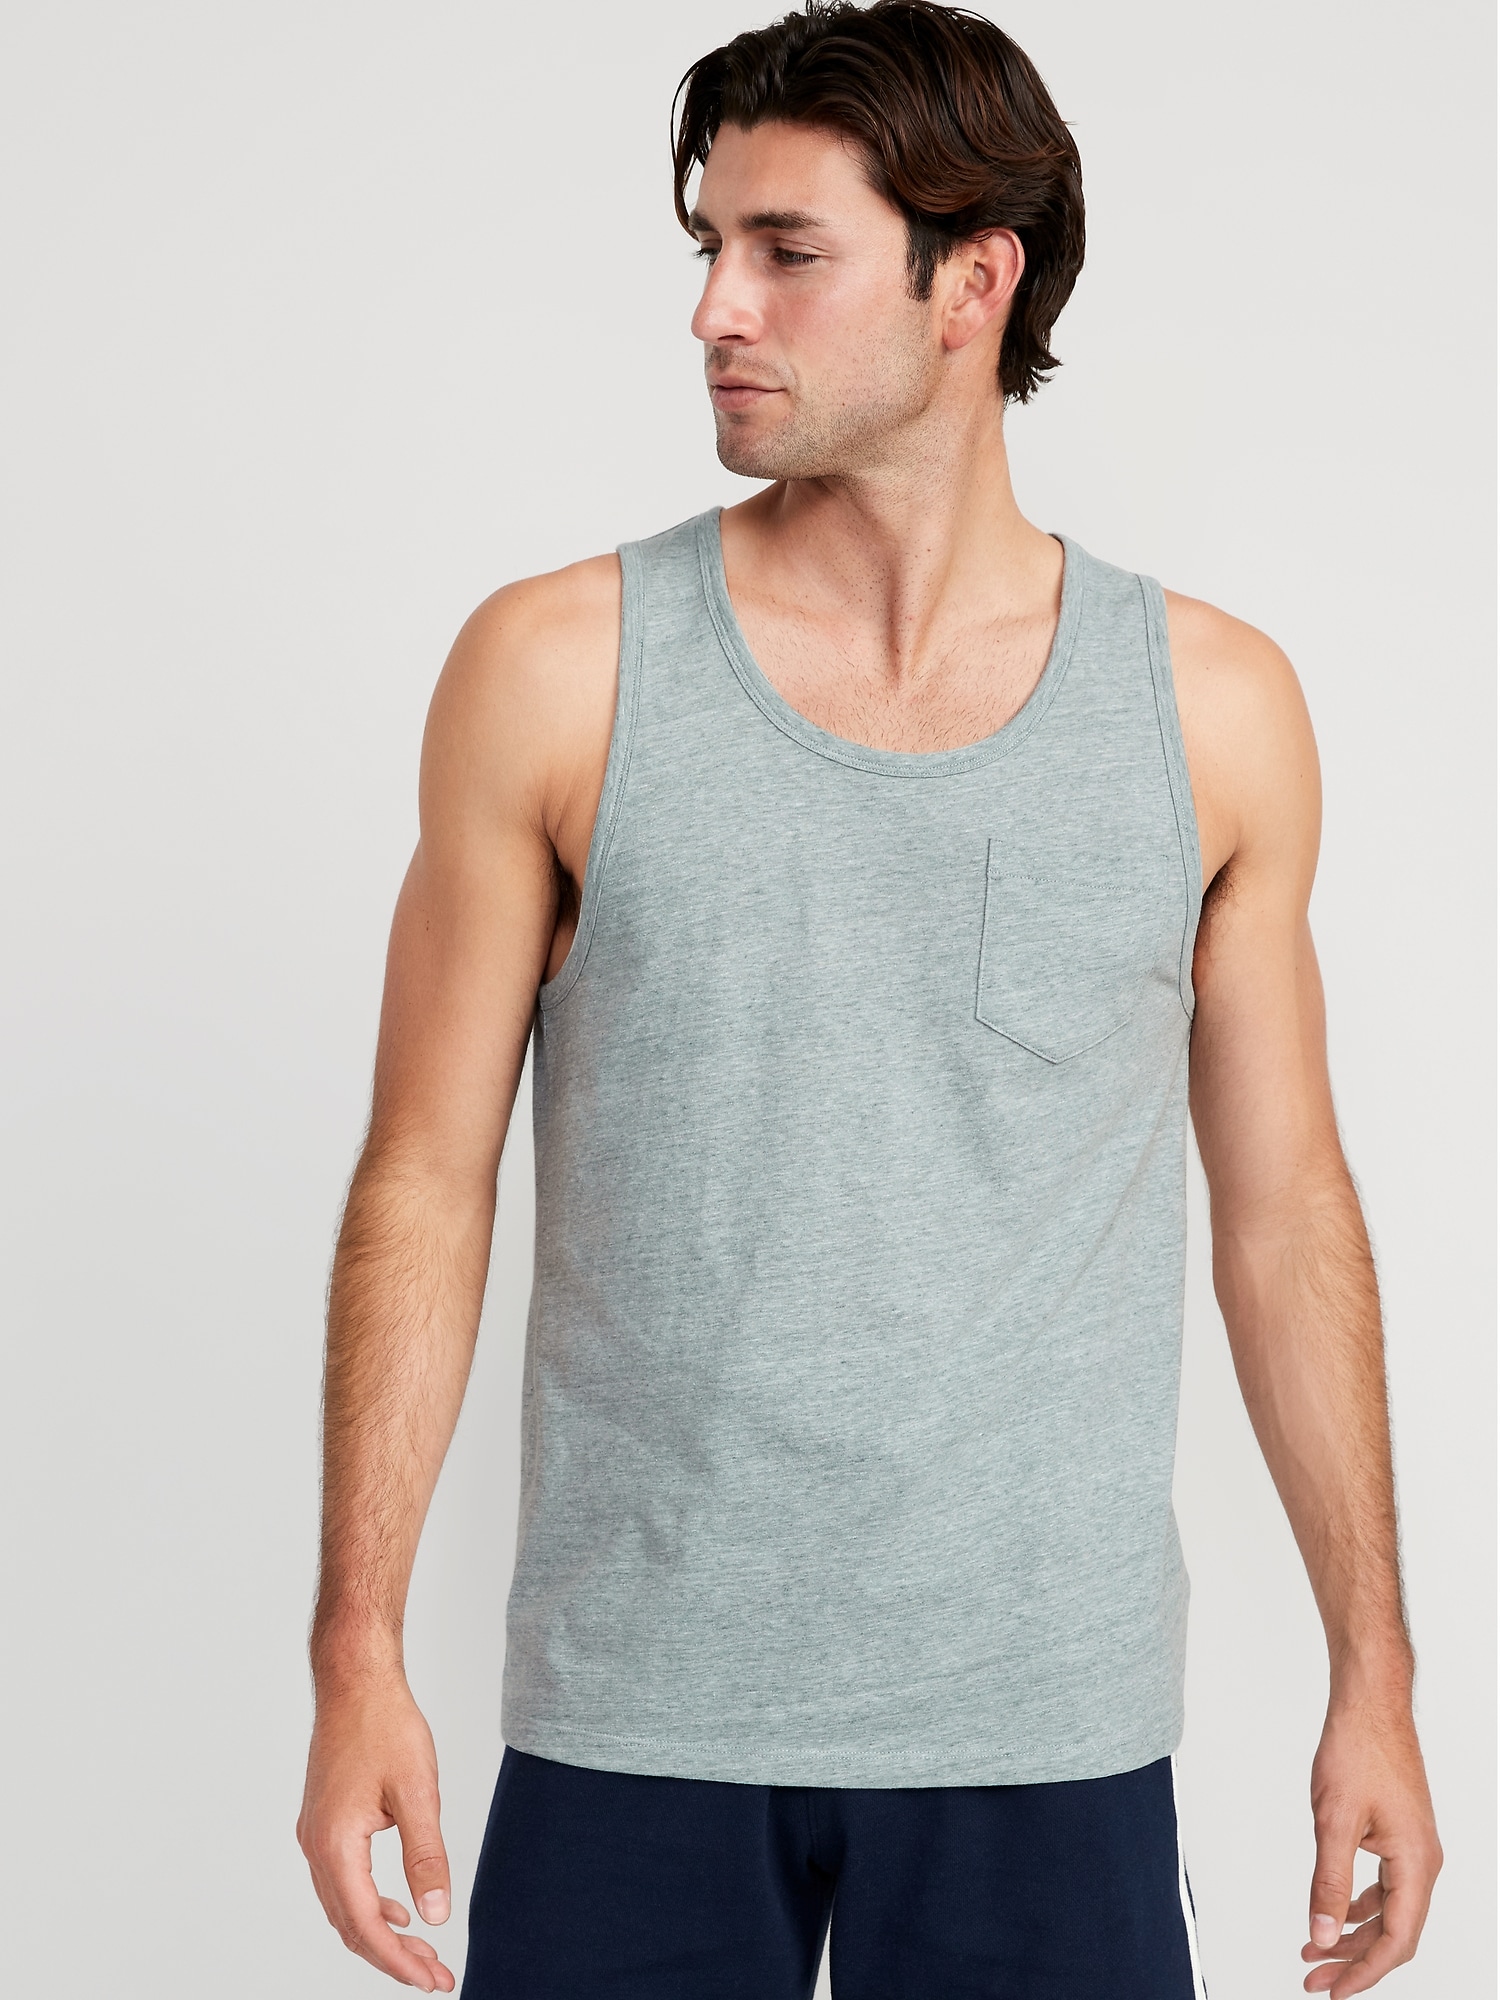 Old Navy Classic Pocket Tank Top for Men brown - 656272002